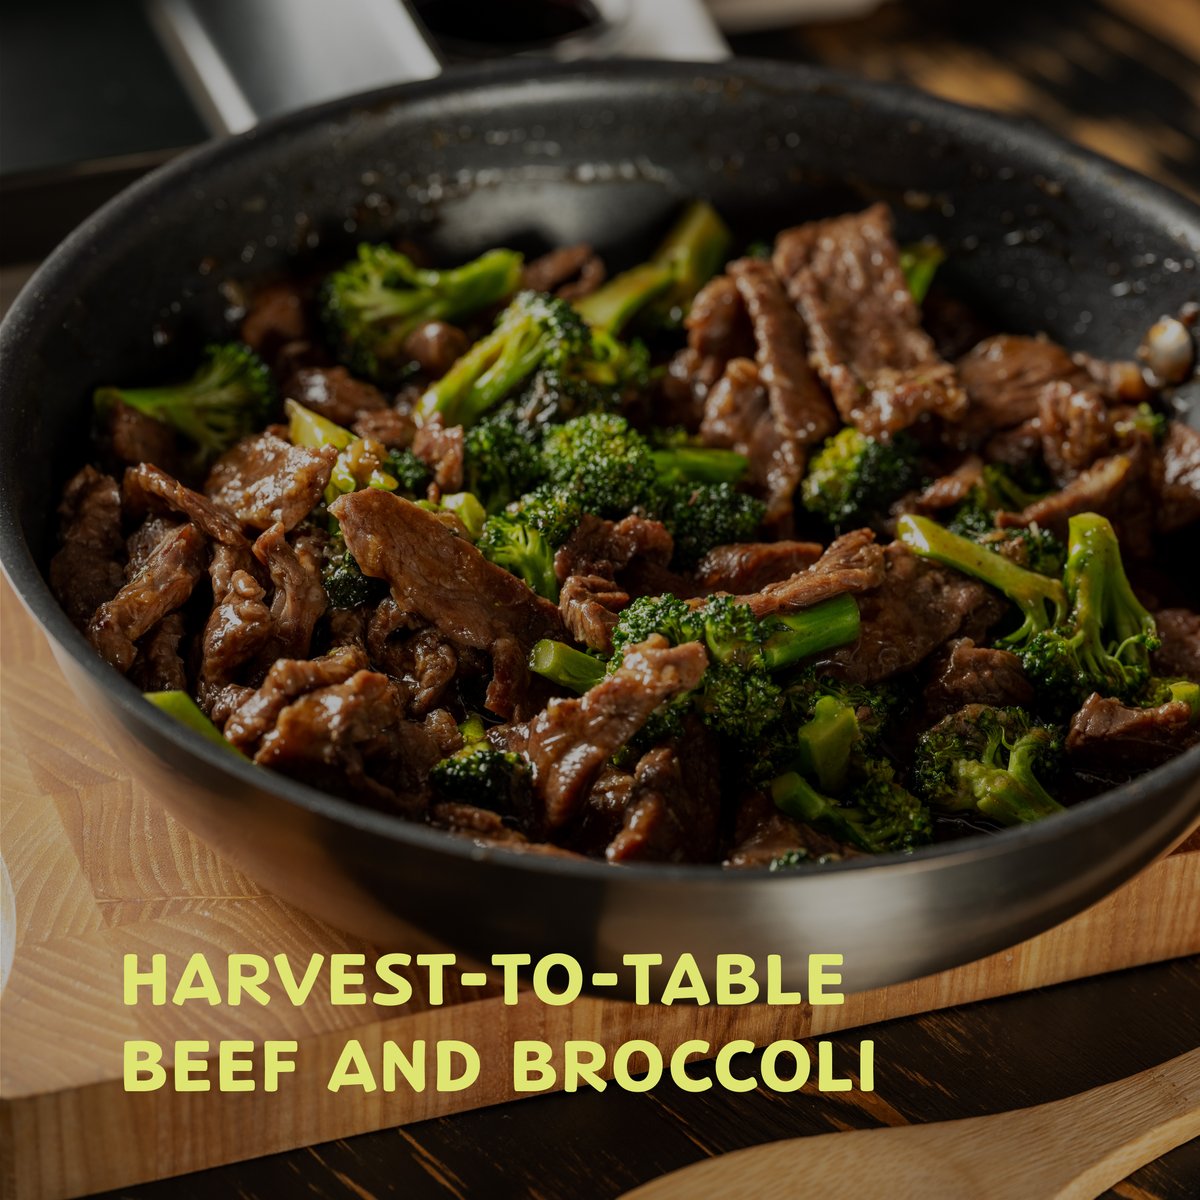 Check out my Instagram or Facebook for this beef and broccoli recipe! So yummy and a great way to use your freshly harvested broccoli from the garden!
(From recipetineats.com/chinese-beef-a…)
 #ChineseCooking #StirFryRecipe #BeefBroccoli #EasyDinner #HomeCooking  #CookingAtHome